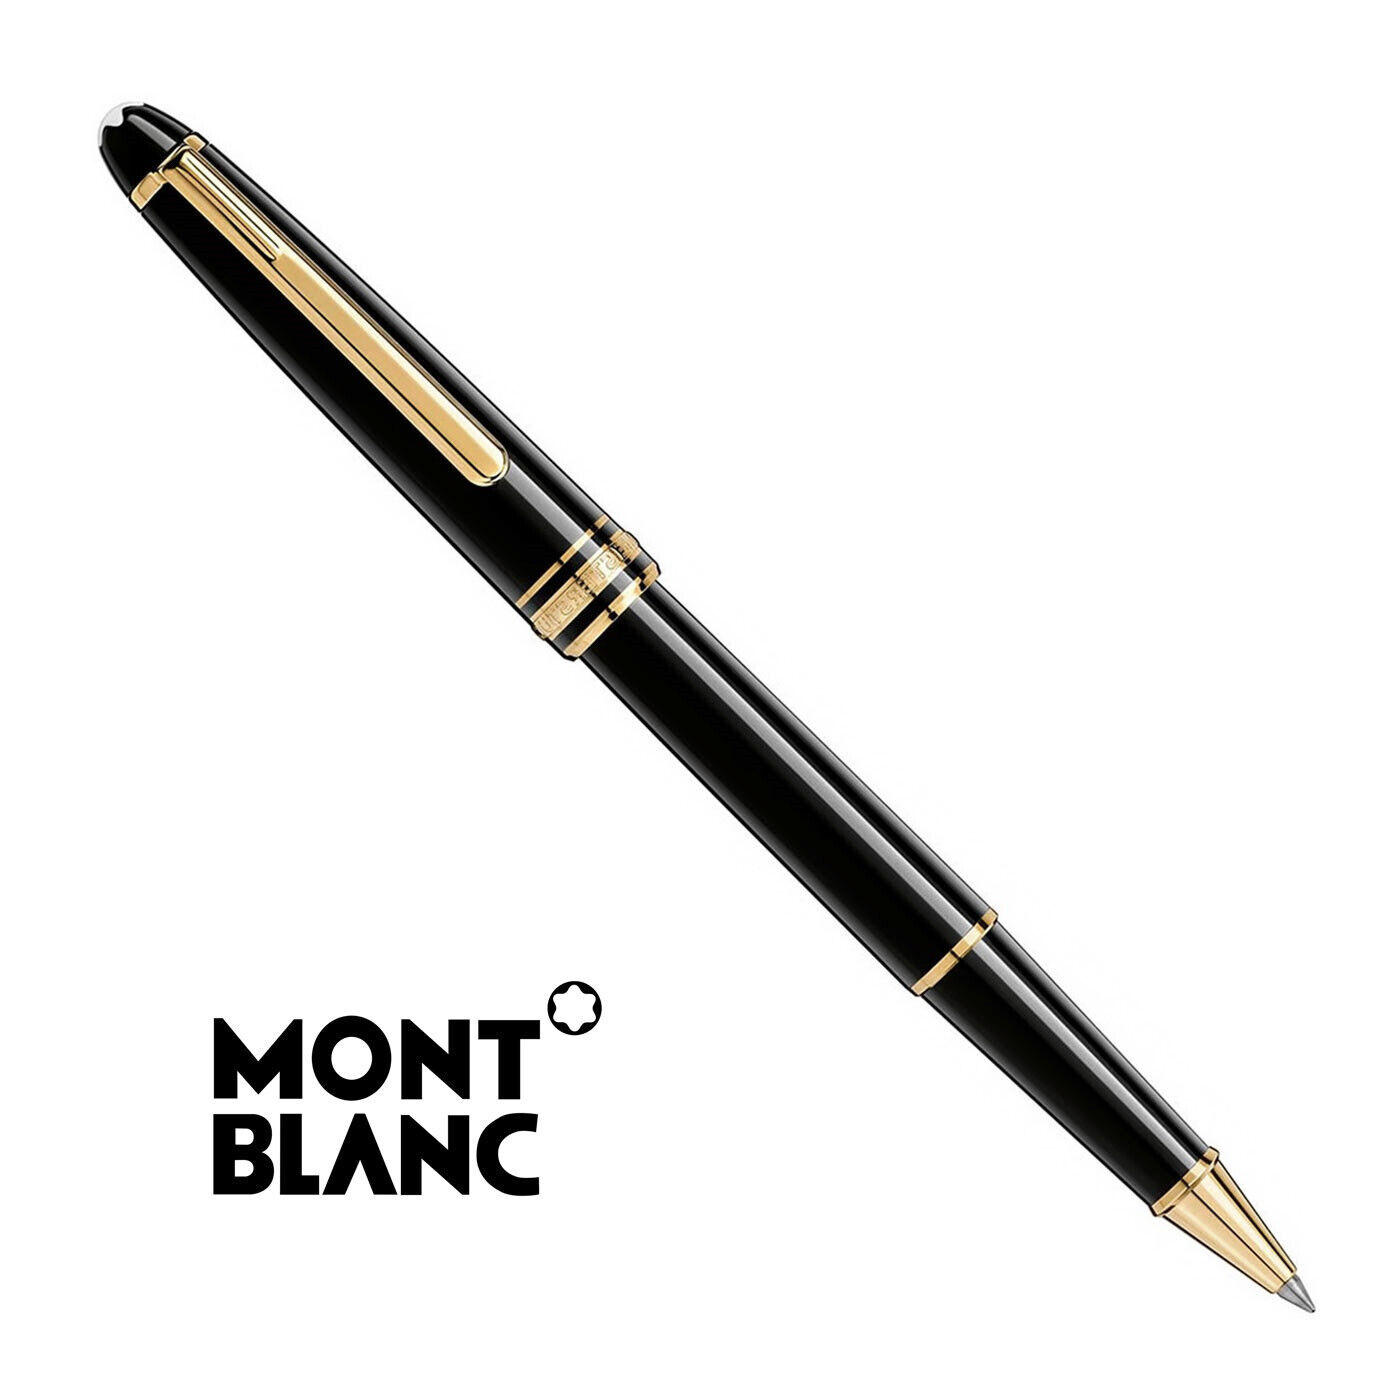 New Authentic Montblanc Meisterstuck Gold Coated Rollerball Pen Markdown Sale